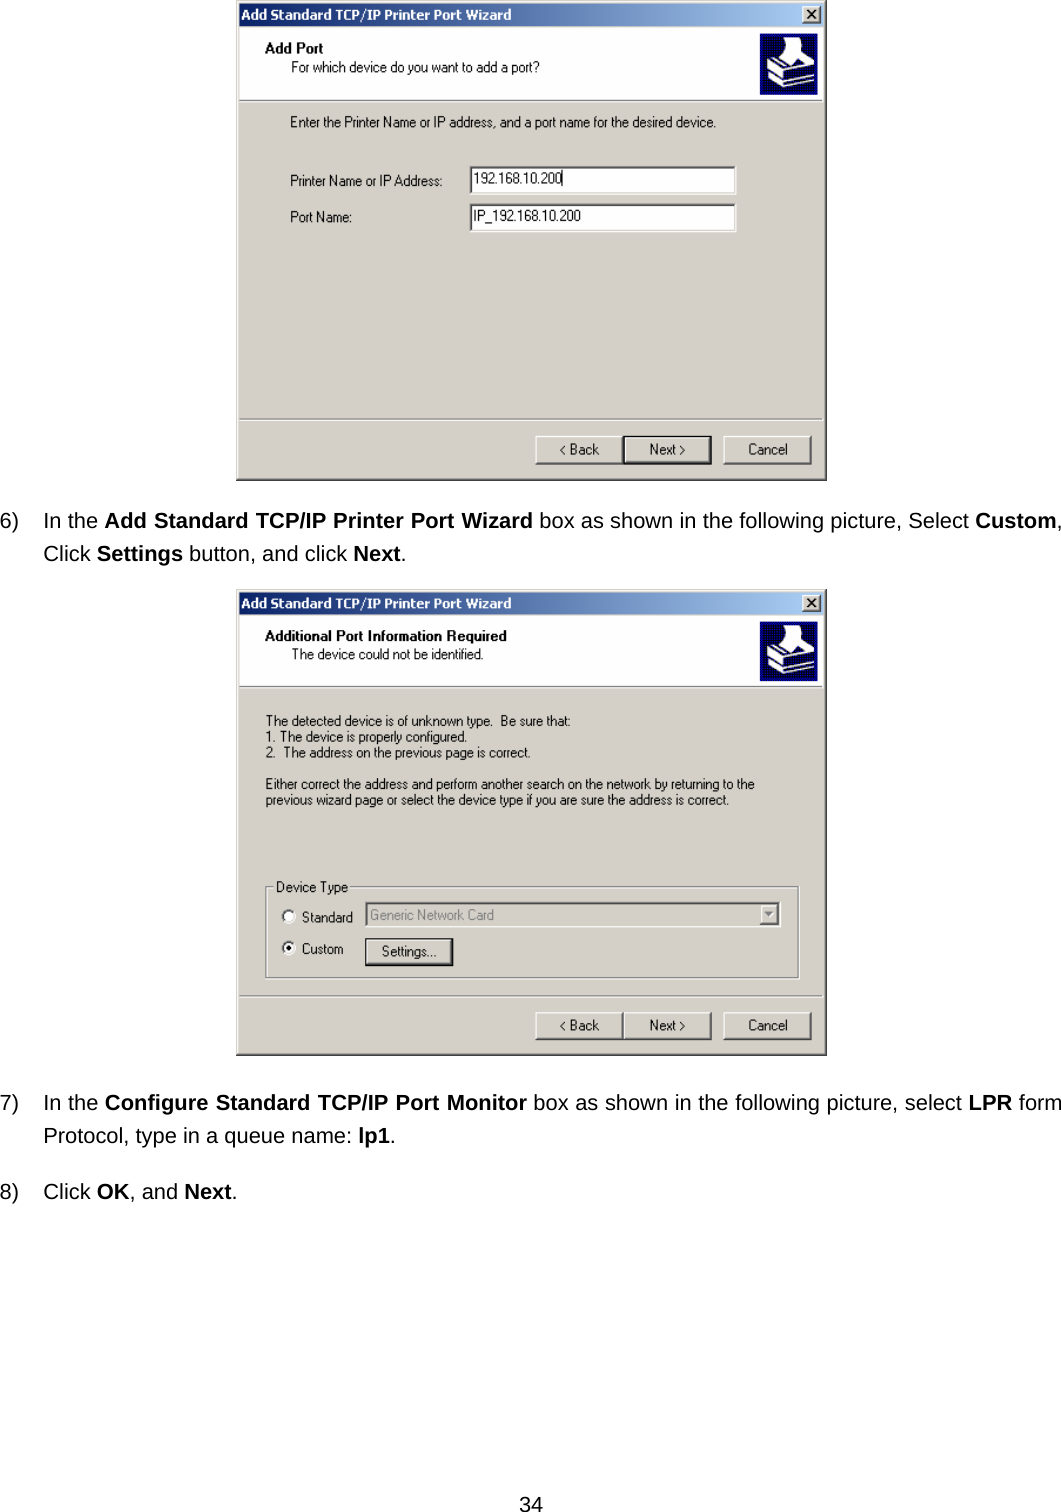  34   6) In the Add Standard TCP/IP Printer Port Wizard box as shown in the following picture, Select Custom, Click Settings button, and click Next.  7) In the Configure Standard TCP/IP Port Monitor box as shown in the following picture, select LPR form Protocol, type in a queue name: lp1. 8) Click OK, and Next. 